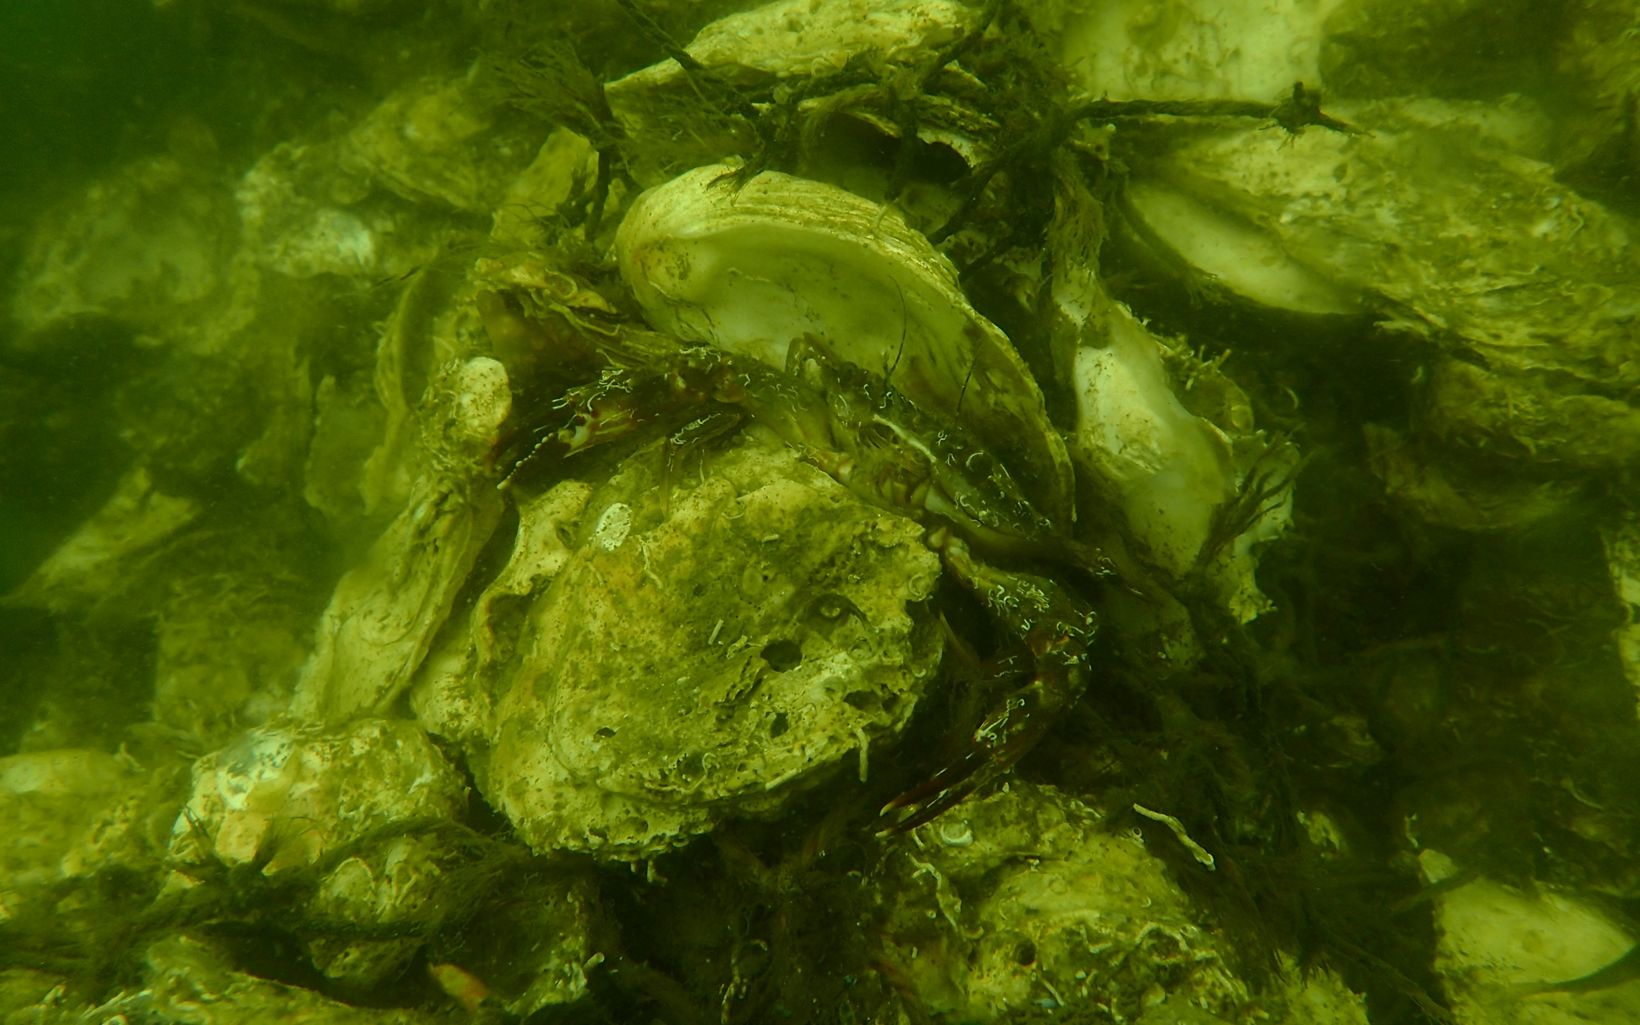 DEPLOYED OYSTER SHELLS  Shells are used to build reefs and quickly become home for many sea creatures like this small crab. © Marine Futures Laboratory, The Swire Institute of Marine Science